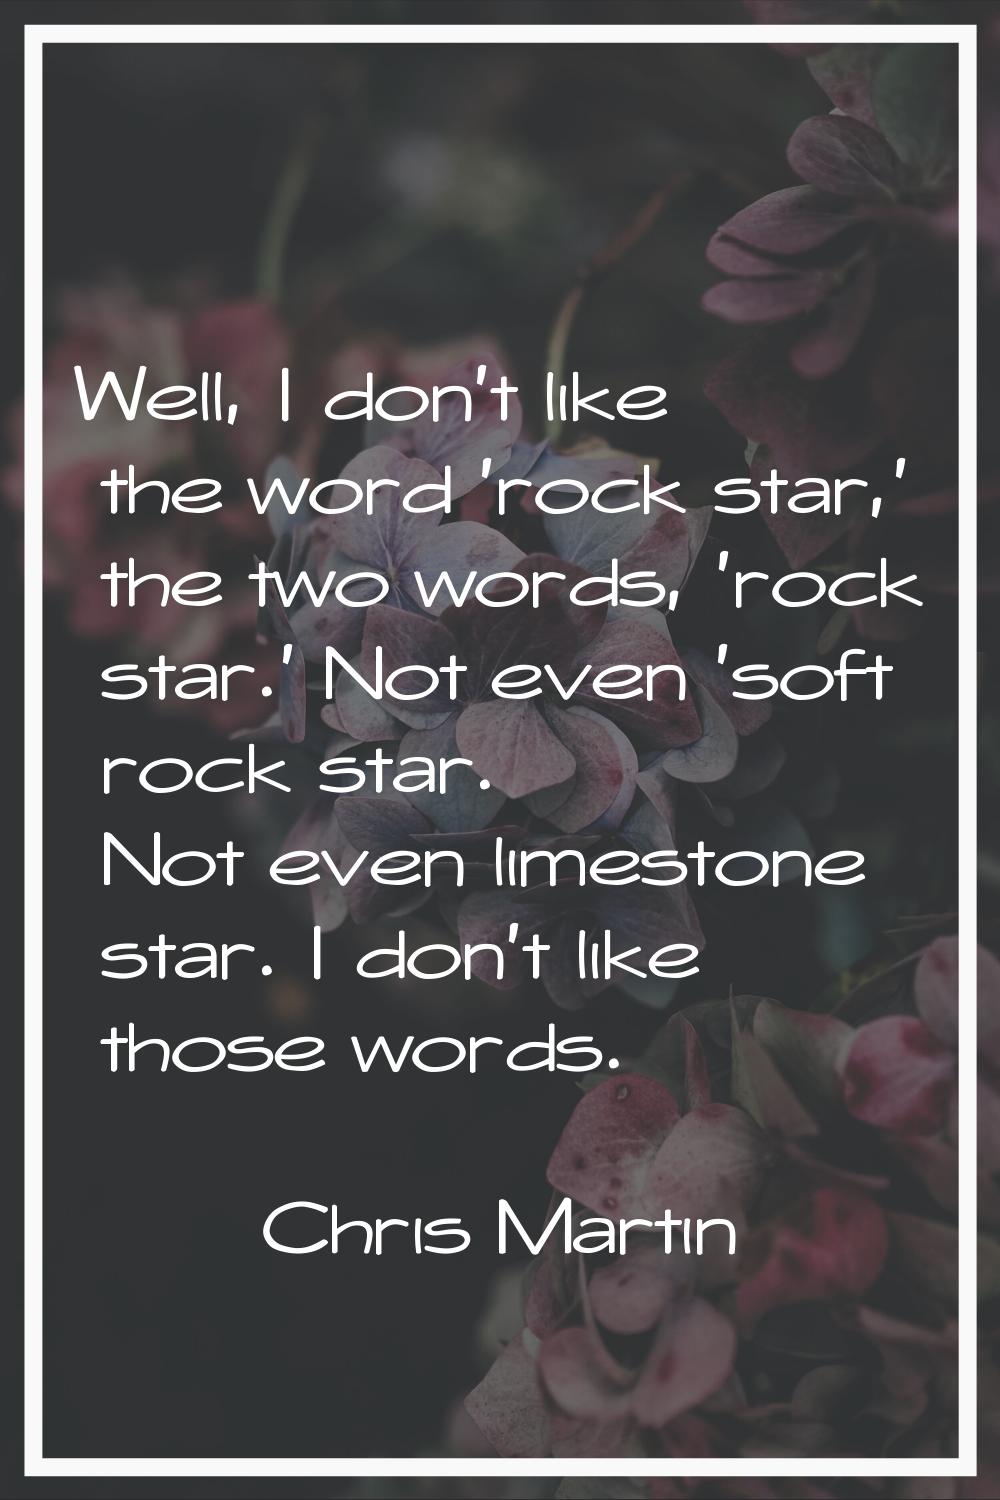 Well, I don't like the word 'rock star,' the two words, 'rock star.' Not even 'soft rock star. Not 